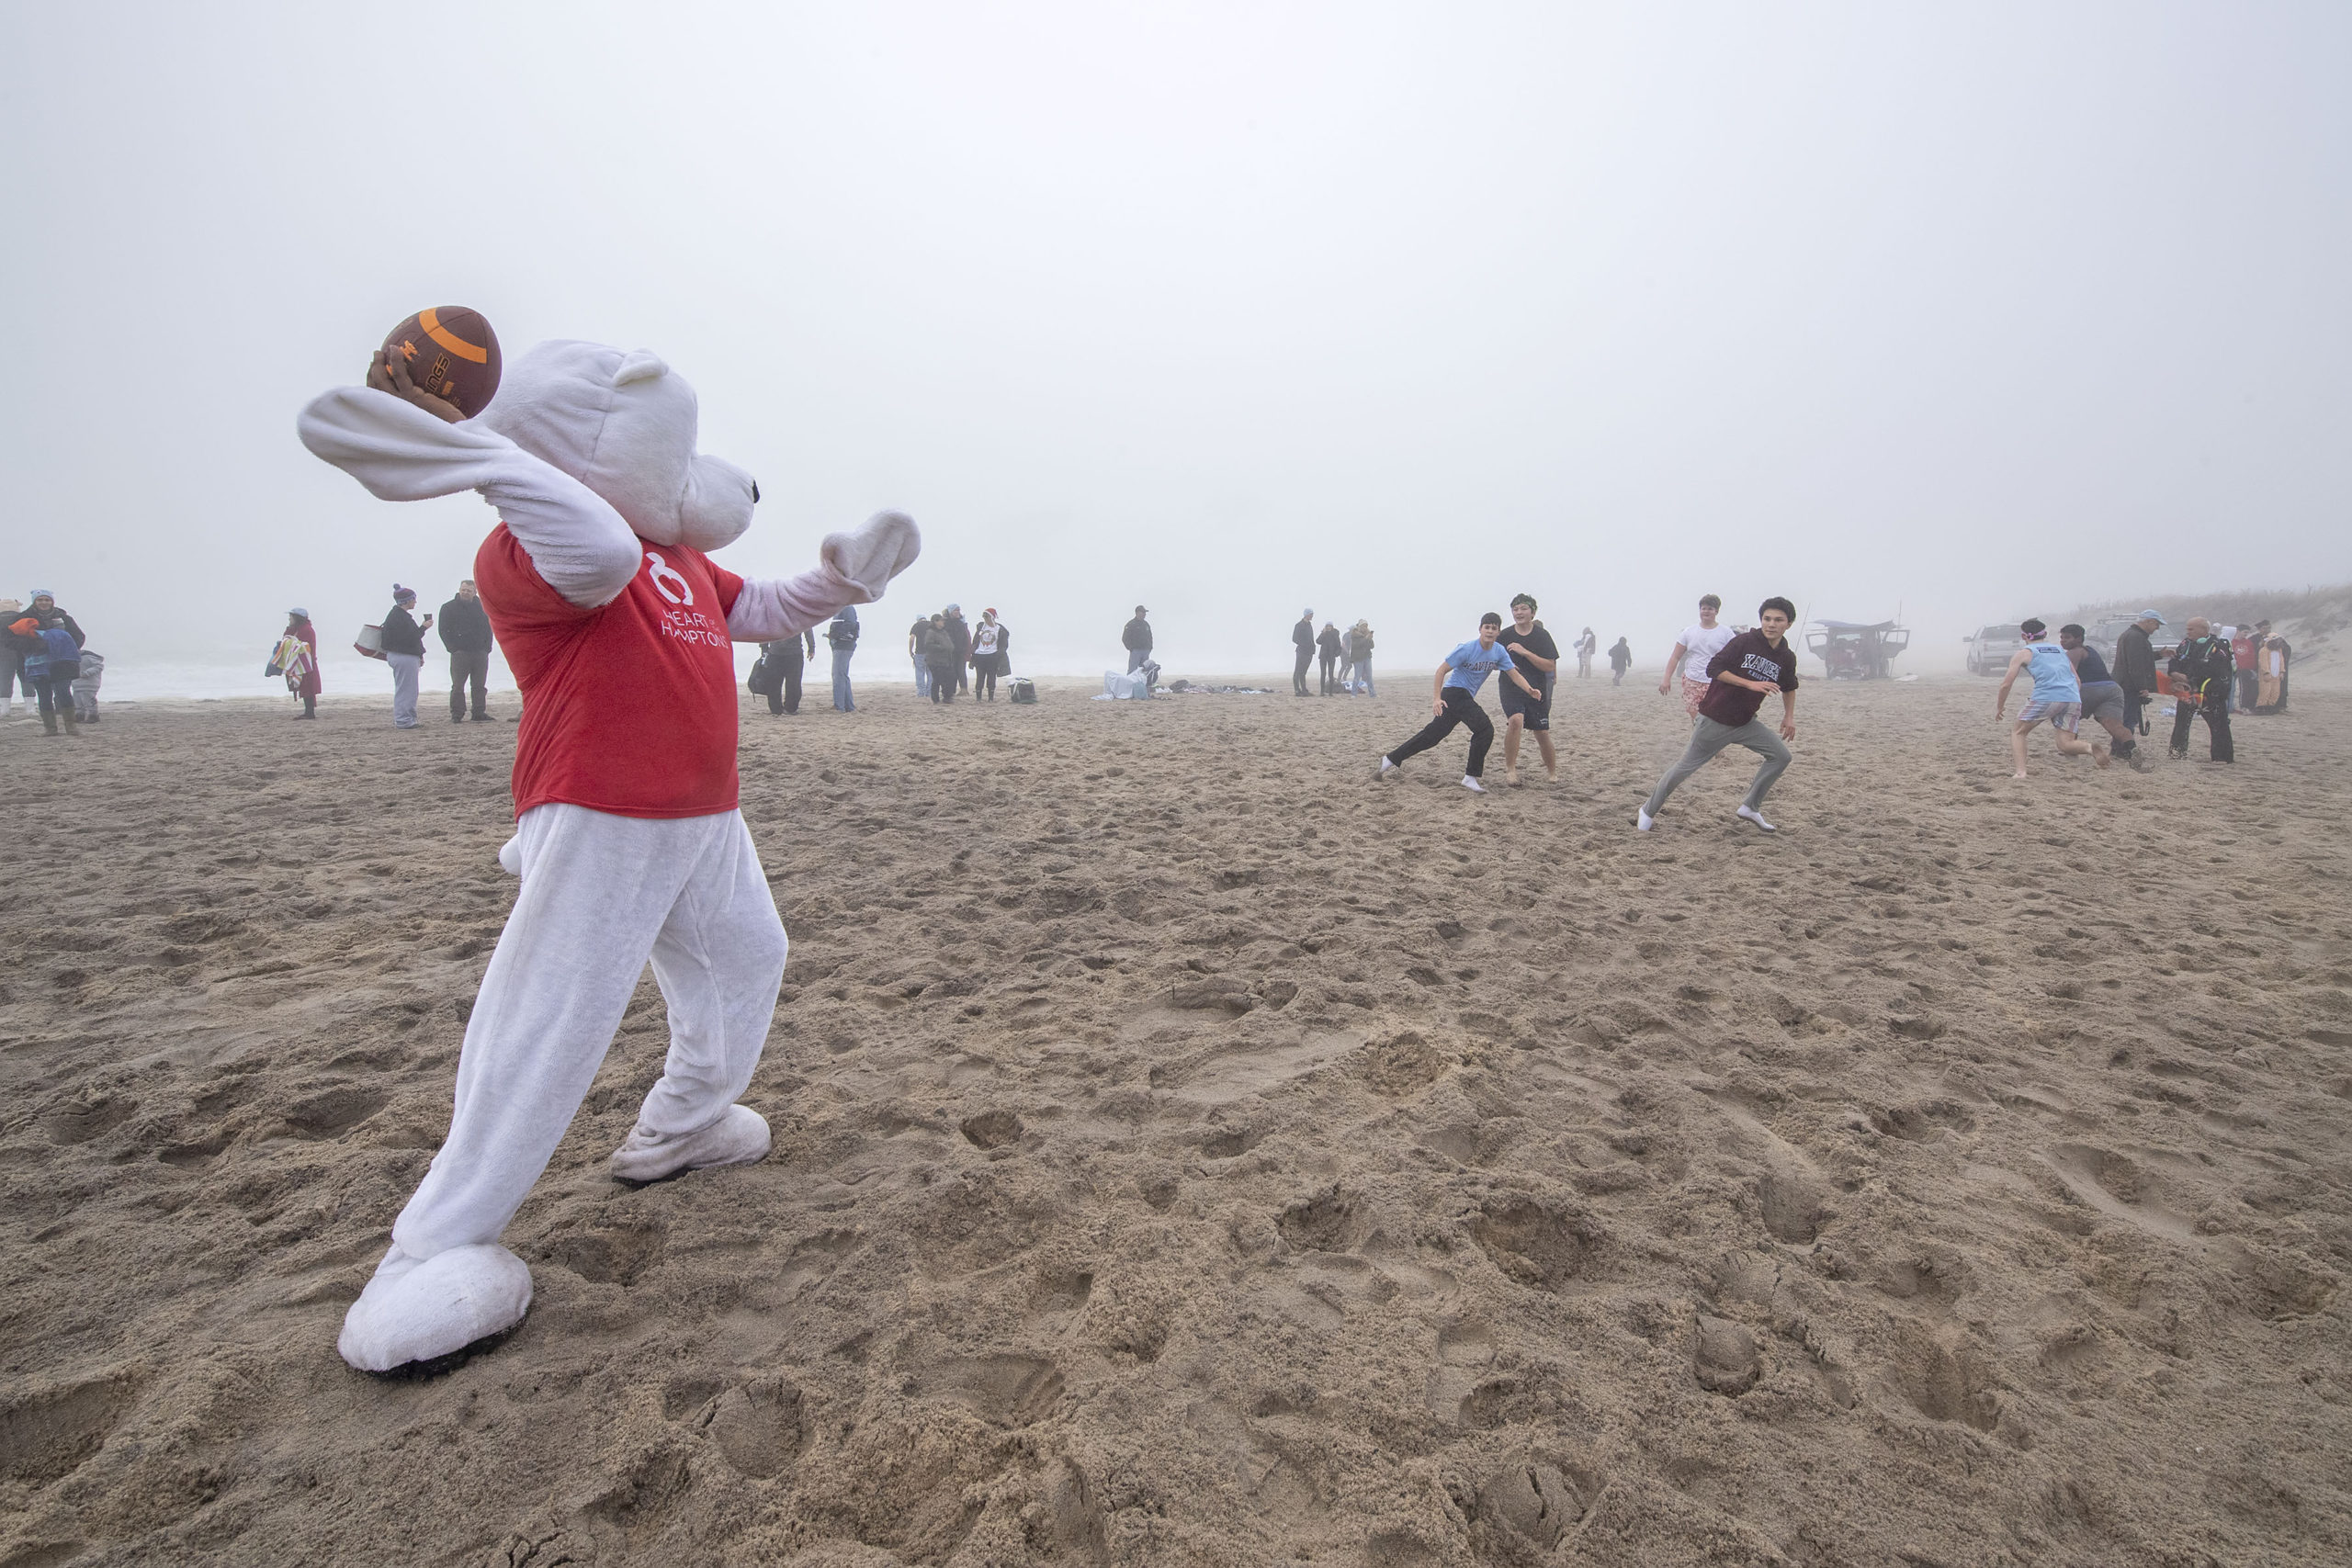 Heart of the Hamptons Polar Bear Gabriel Narvaez subs as Quarterback in a pickup beach tag football game during the 2019 Heart of the Hamptons Polar Bear Plunge at Coopers Beach in Southampton on Saturday morning.